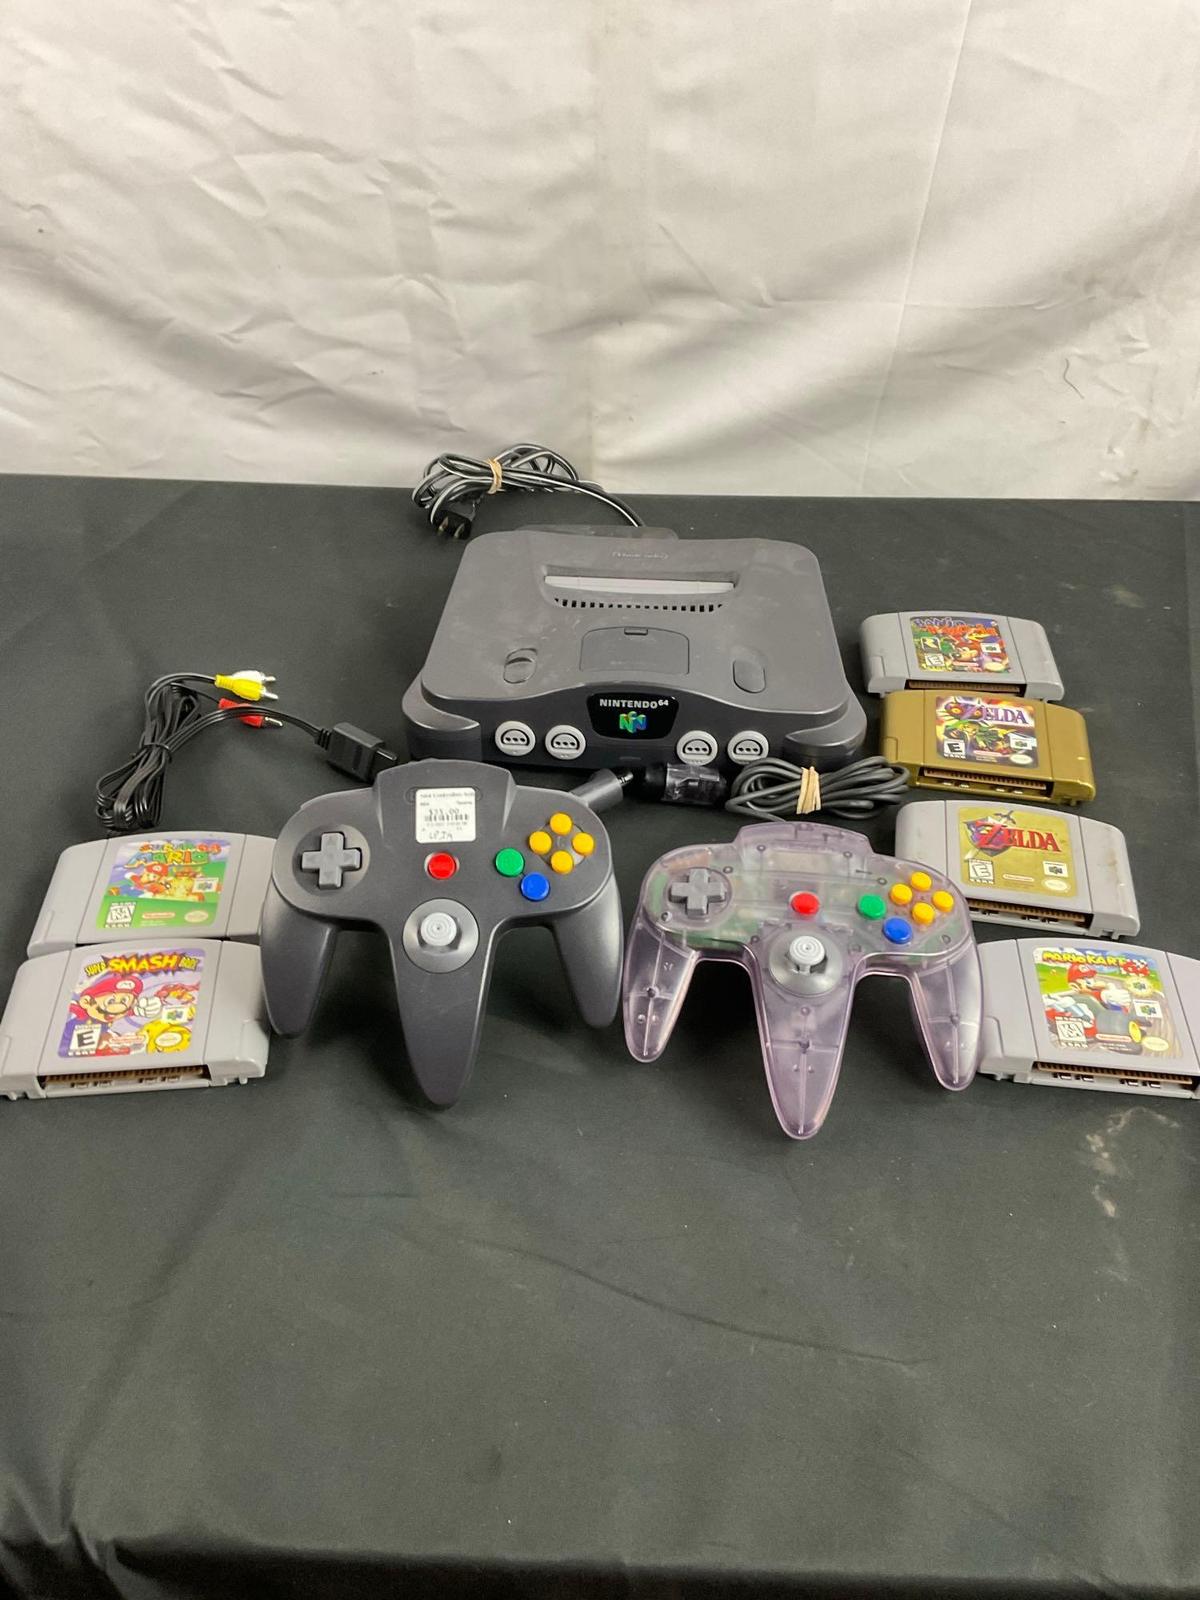 Super Nintendo N64 Gaming Console w/ 2 Controllers & 6 Games incl. Zelda Ocarina of Time,